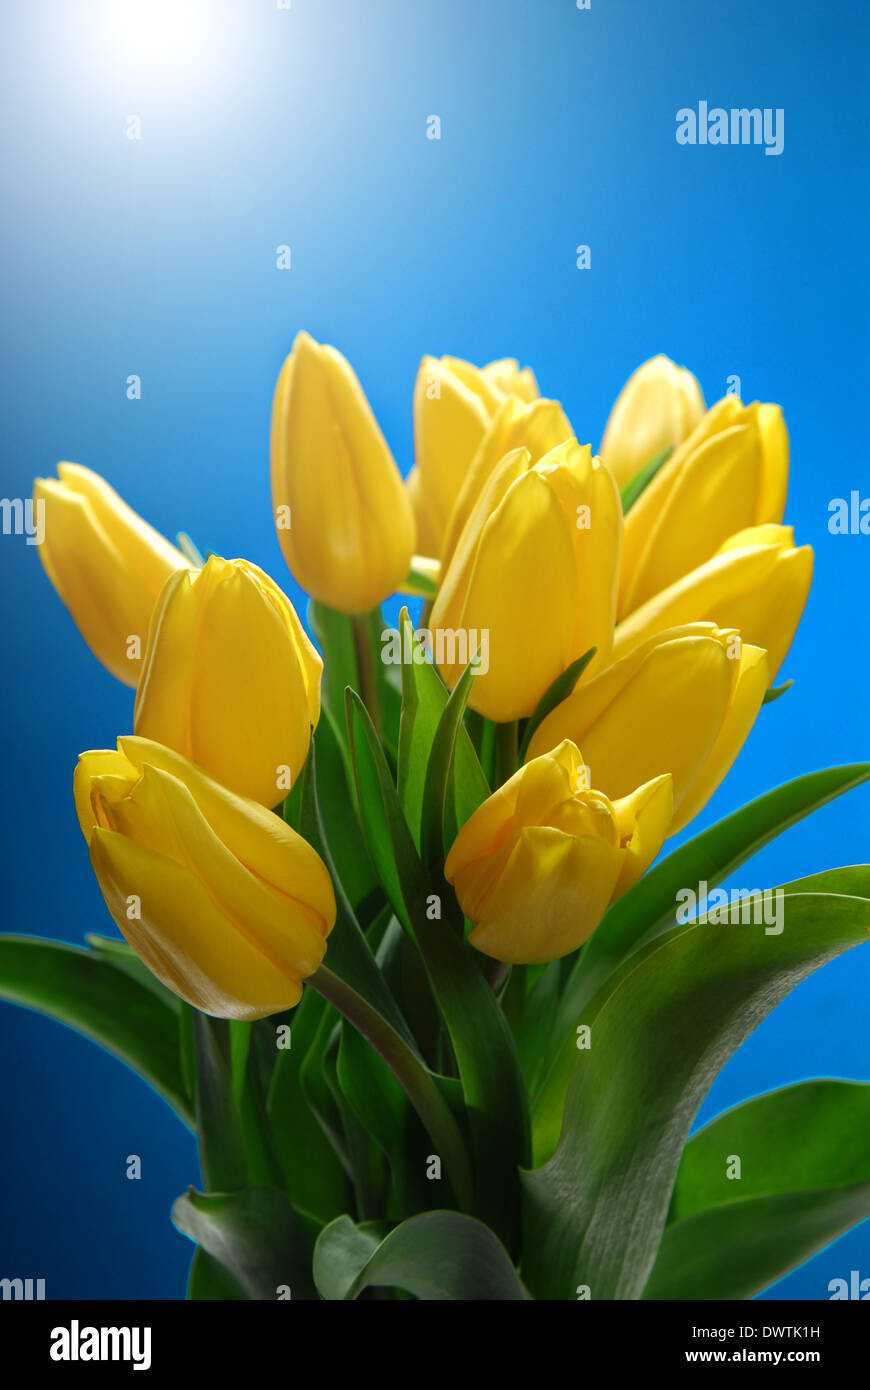 A bouquet of yellow flowers with green leaves Stock Photo